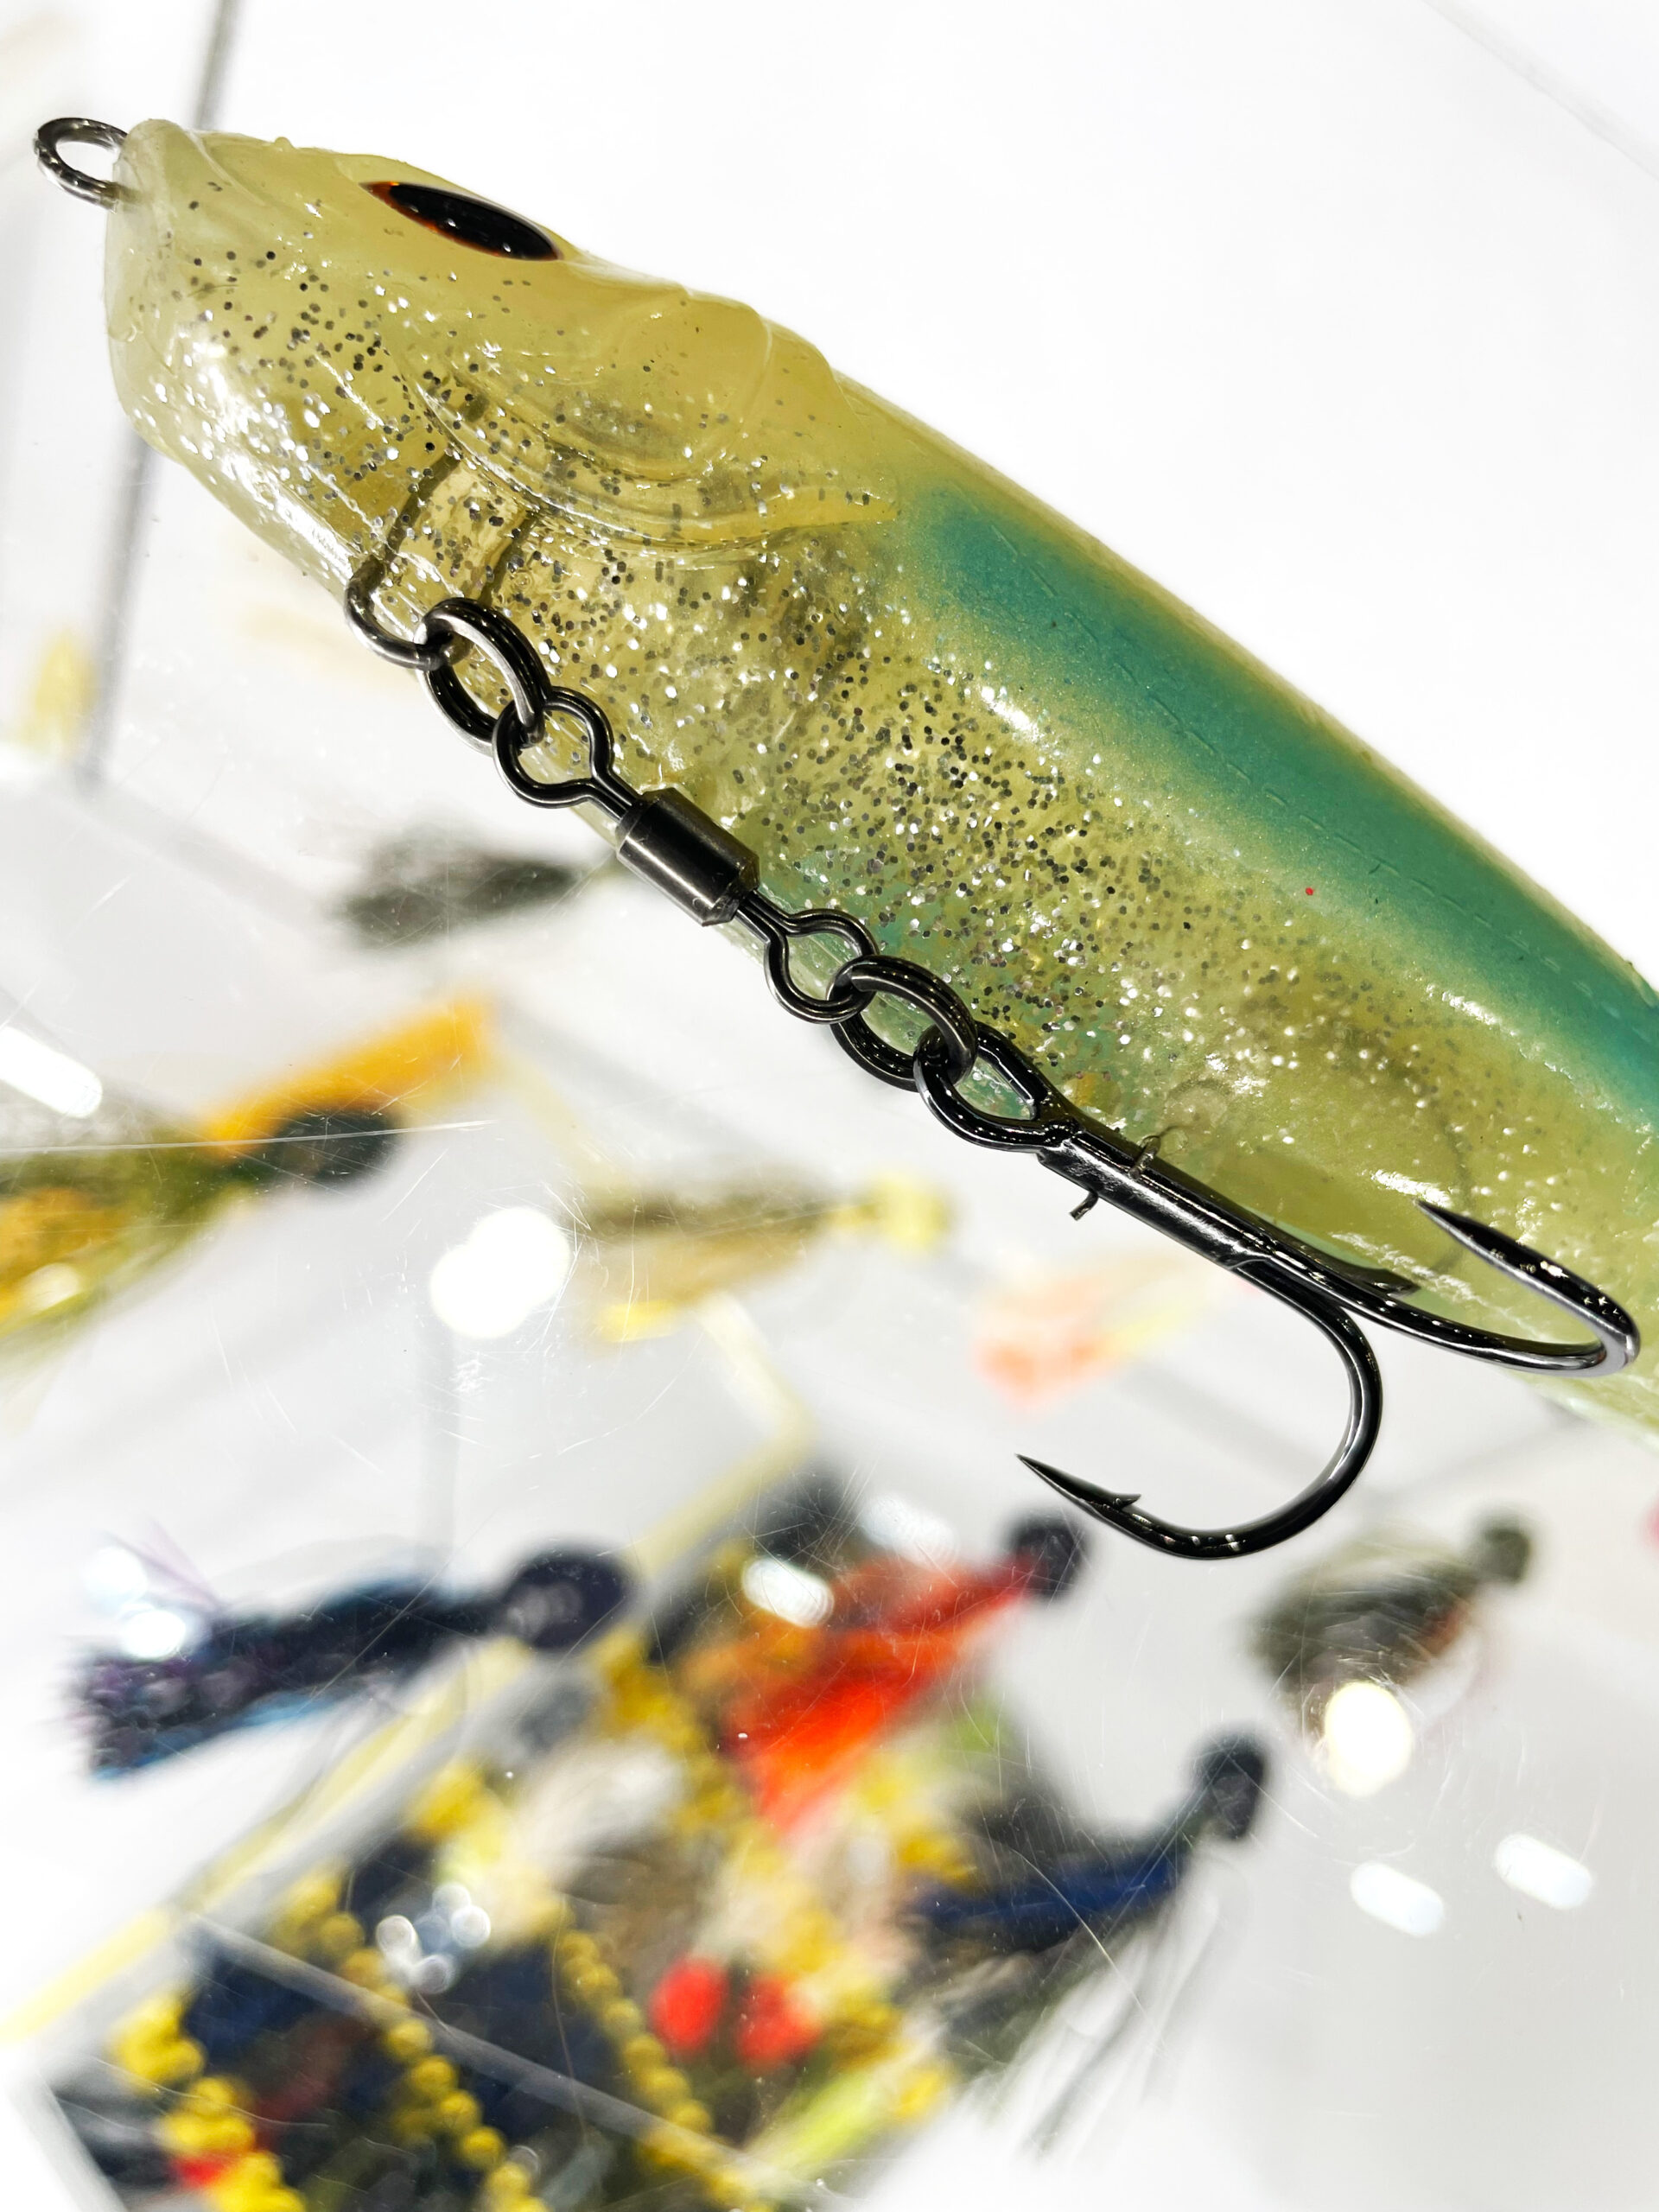 Who's all got their hands on the New Berkley Cull Shad?! 🙋‍♂️ I